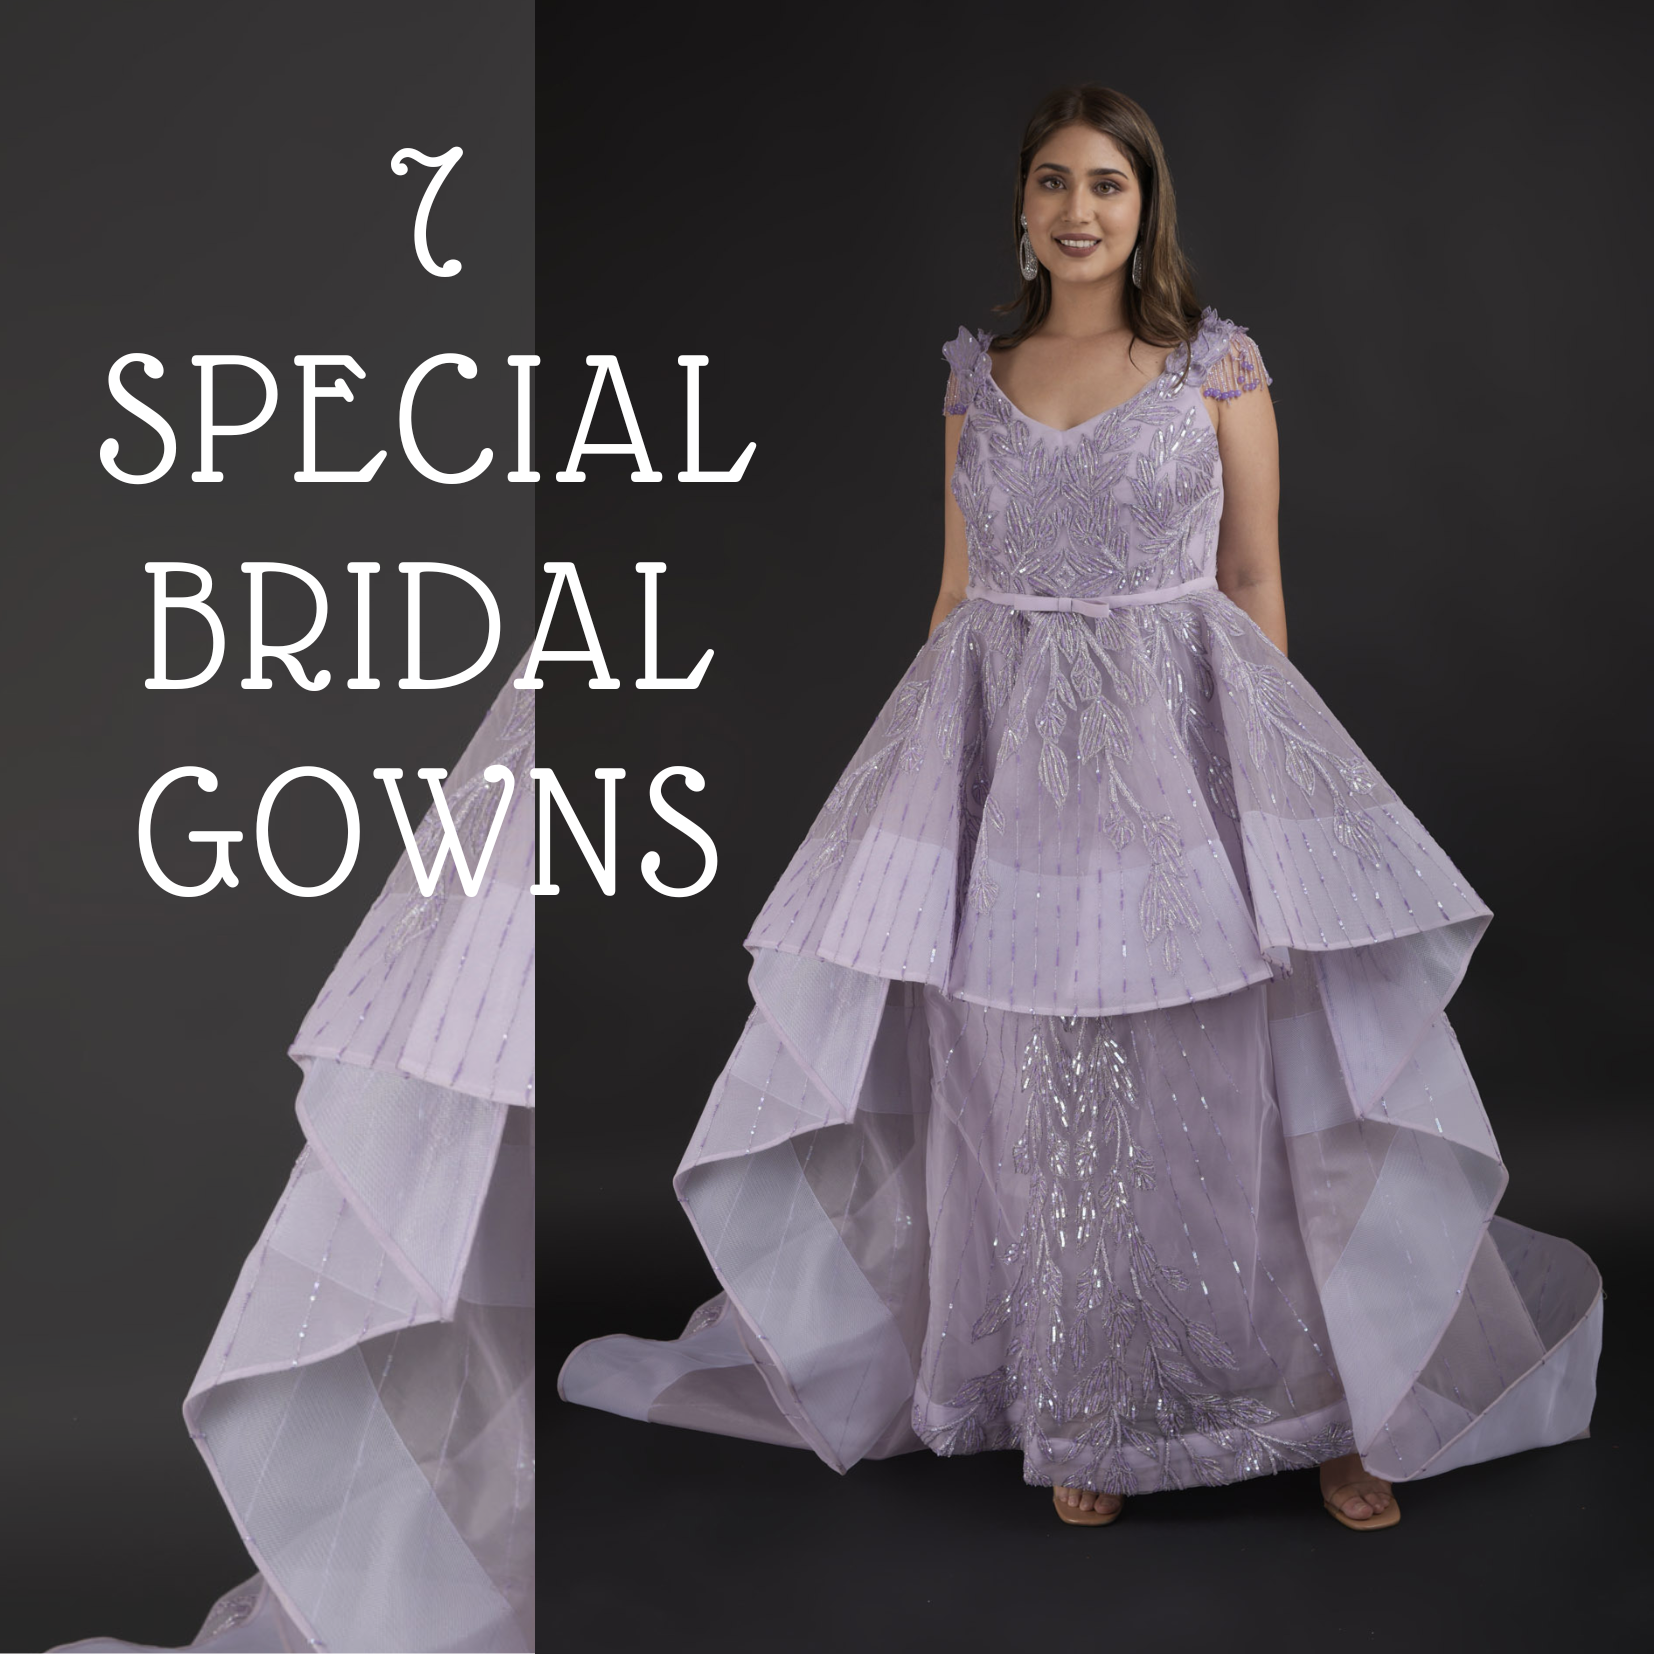 Gowns For Indian Wedding Reception - Bookmark These Trending Styles